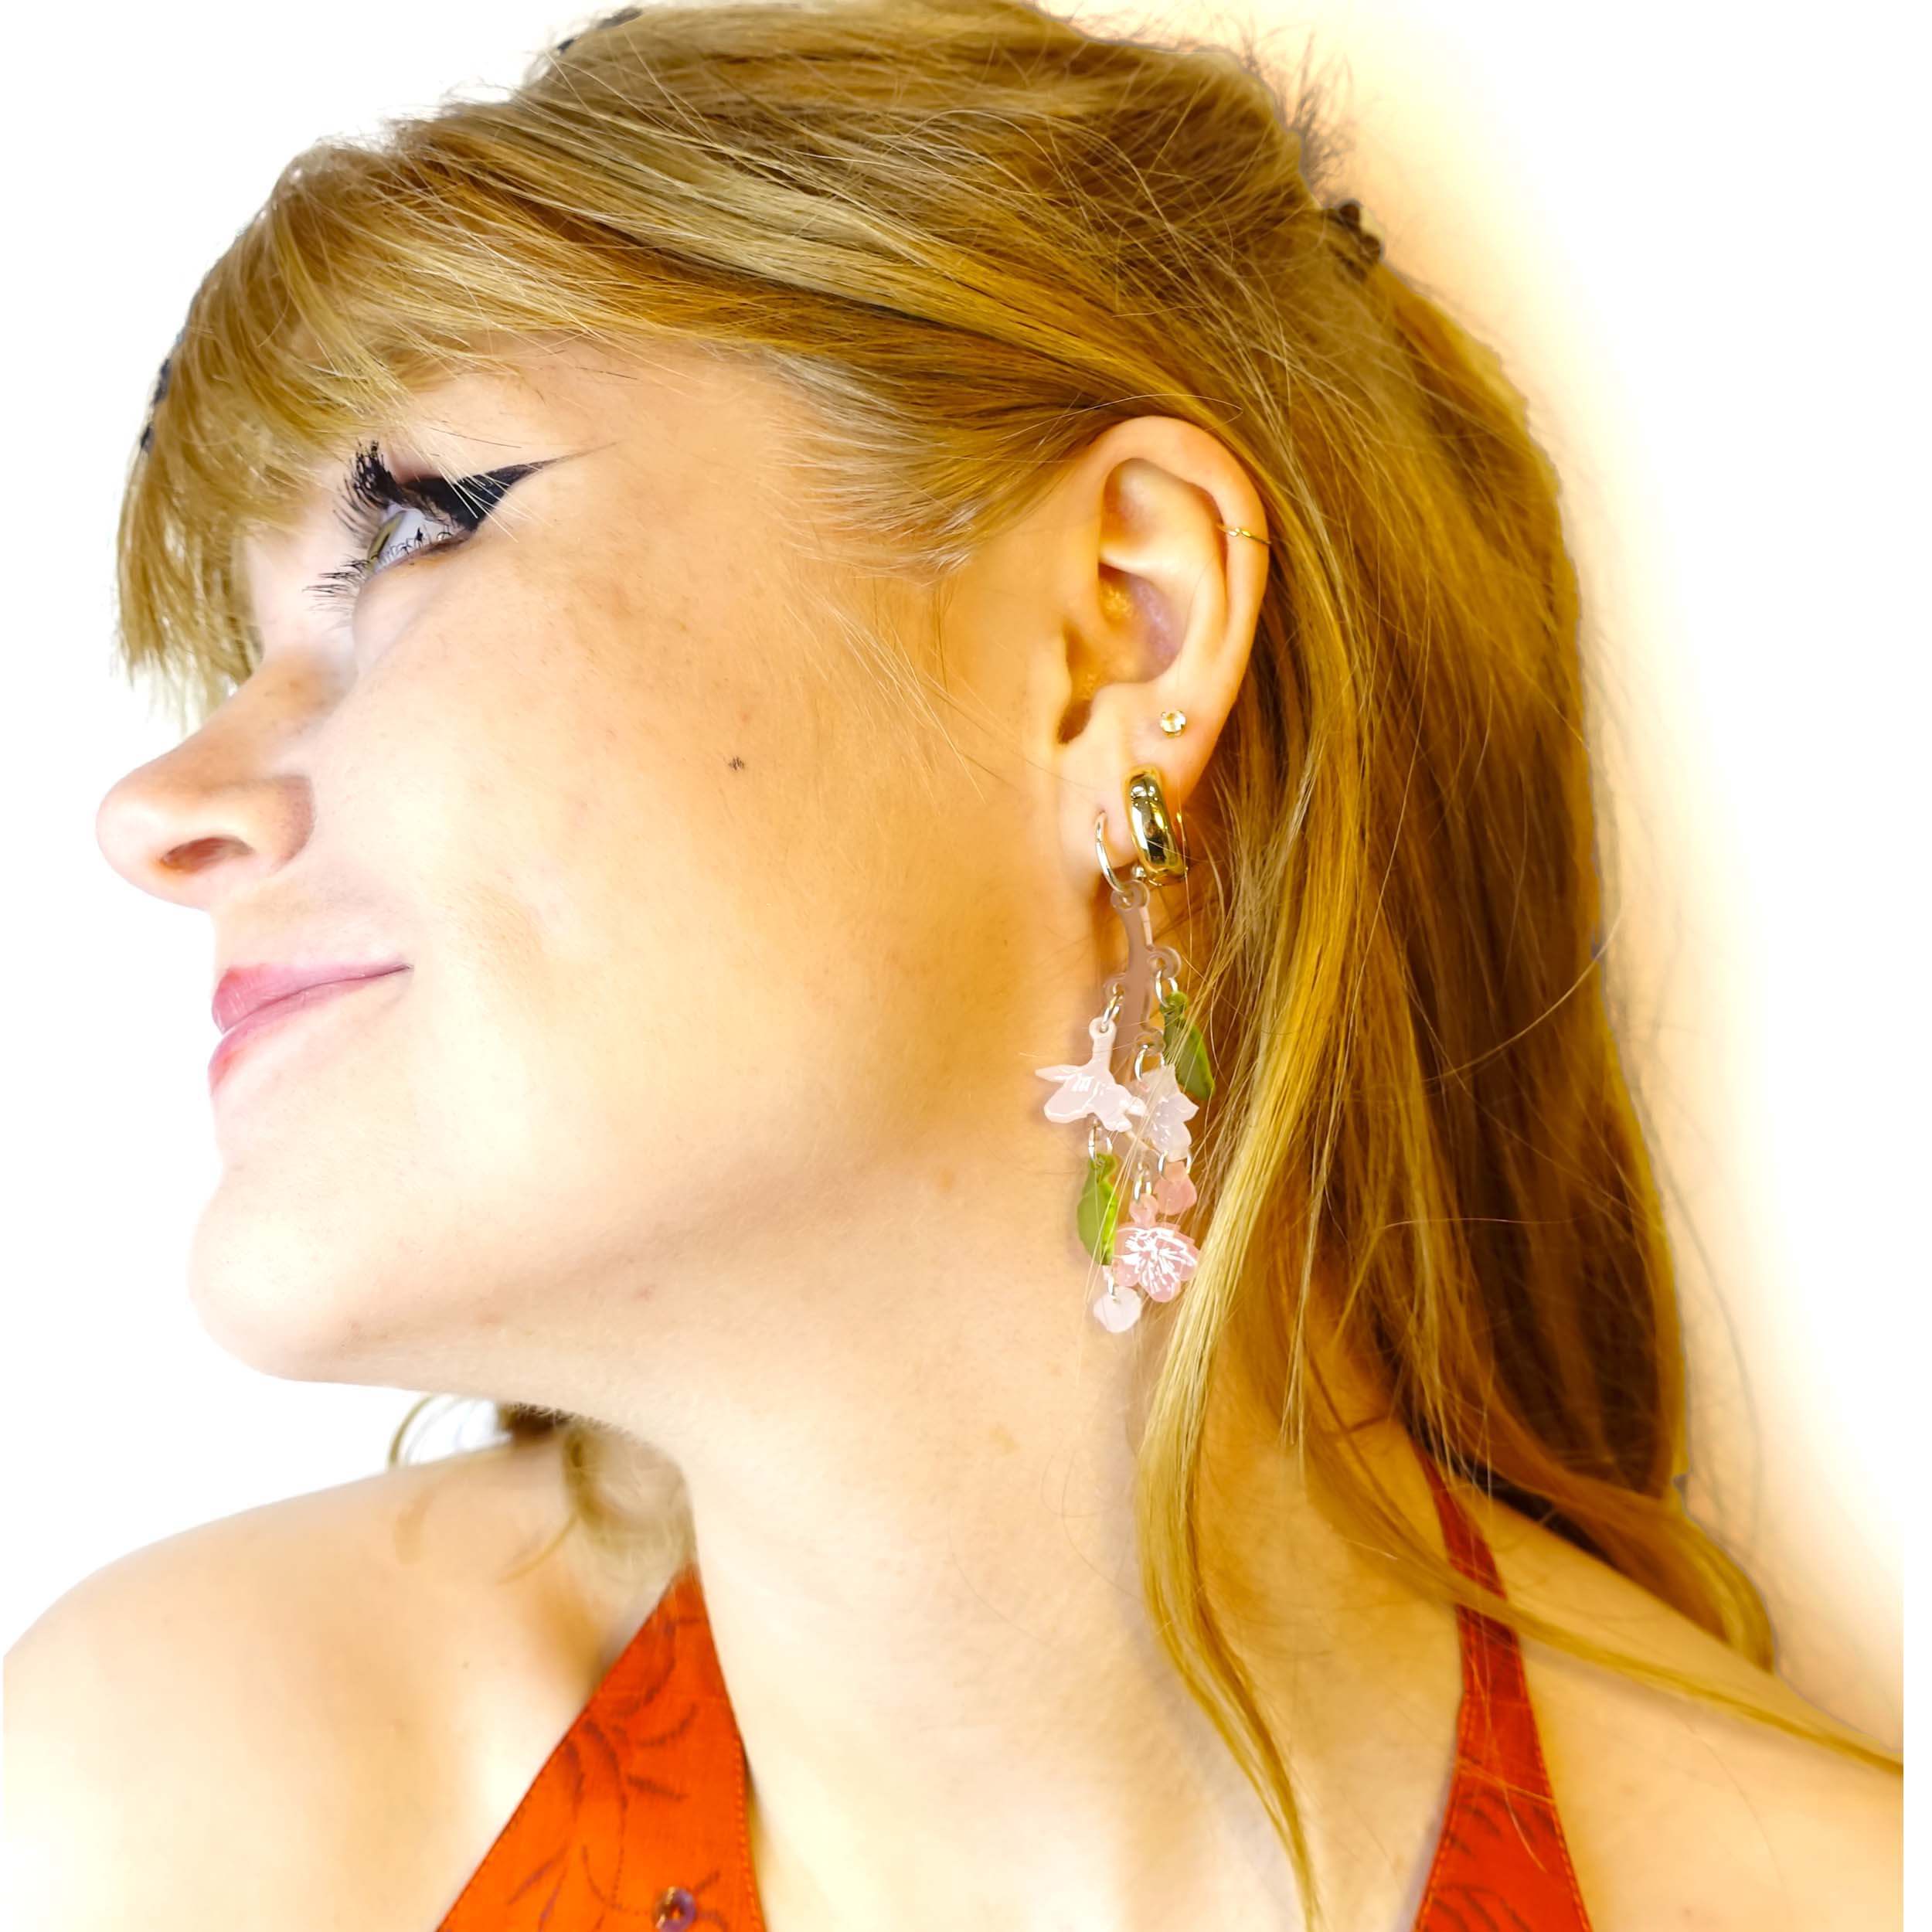 Model wears cherry blossom earrings designed by Sarah Day for Wear and Resist. 